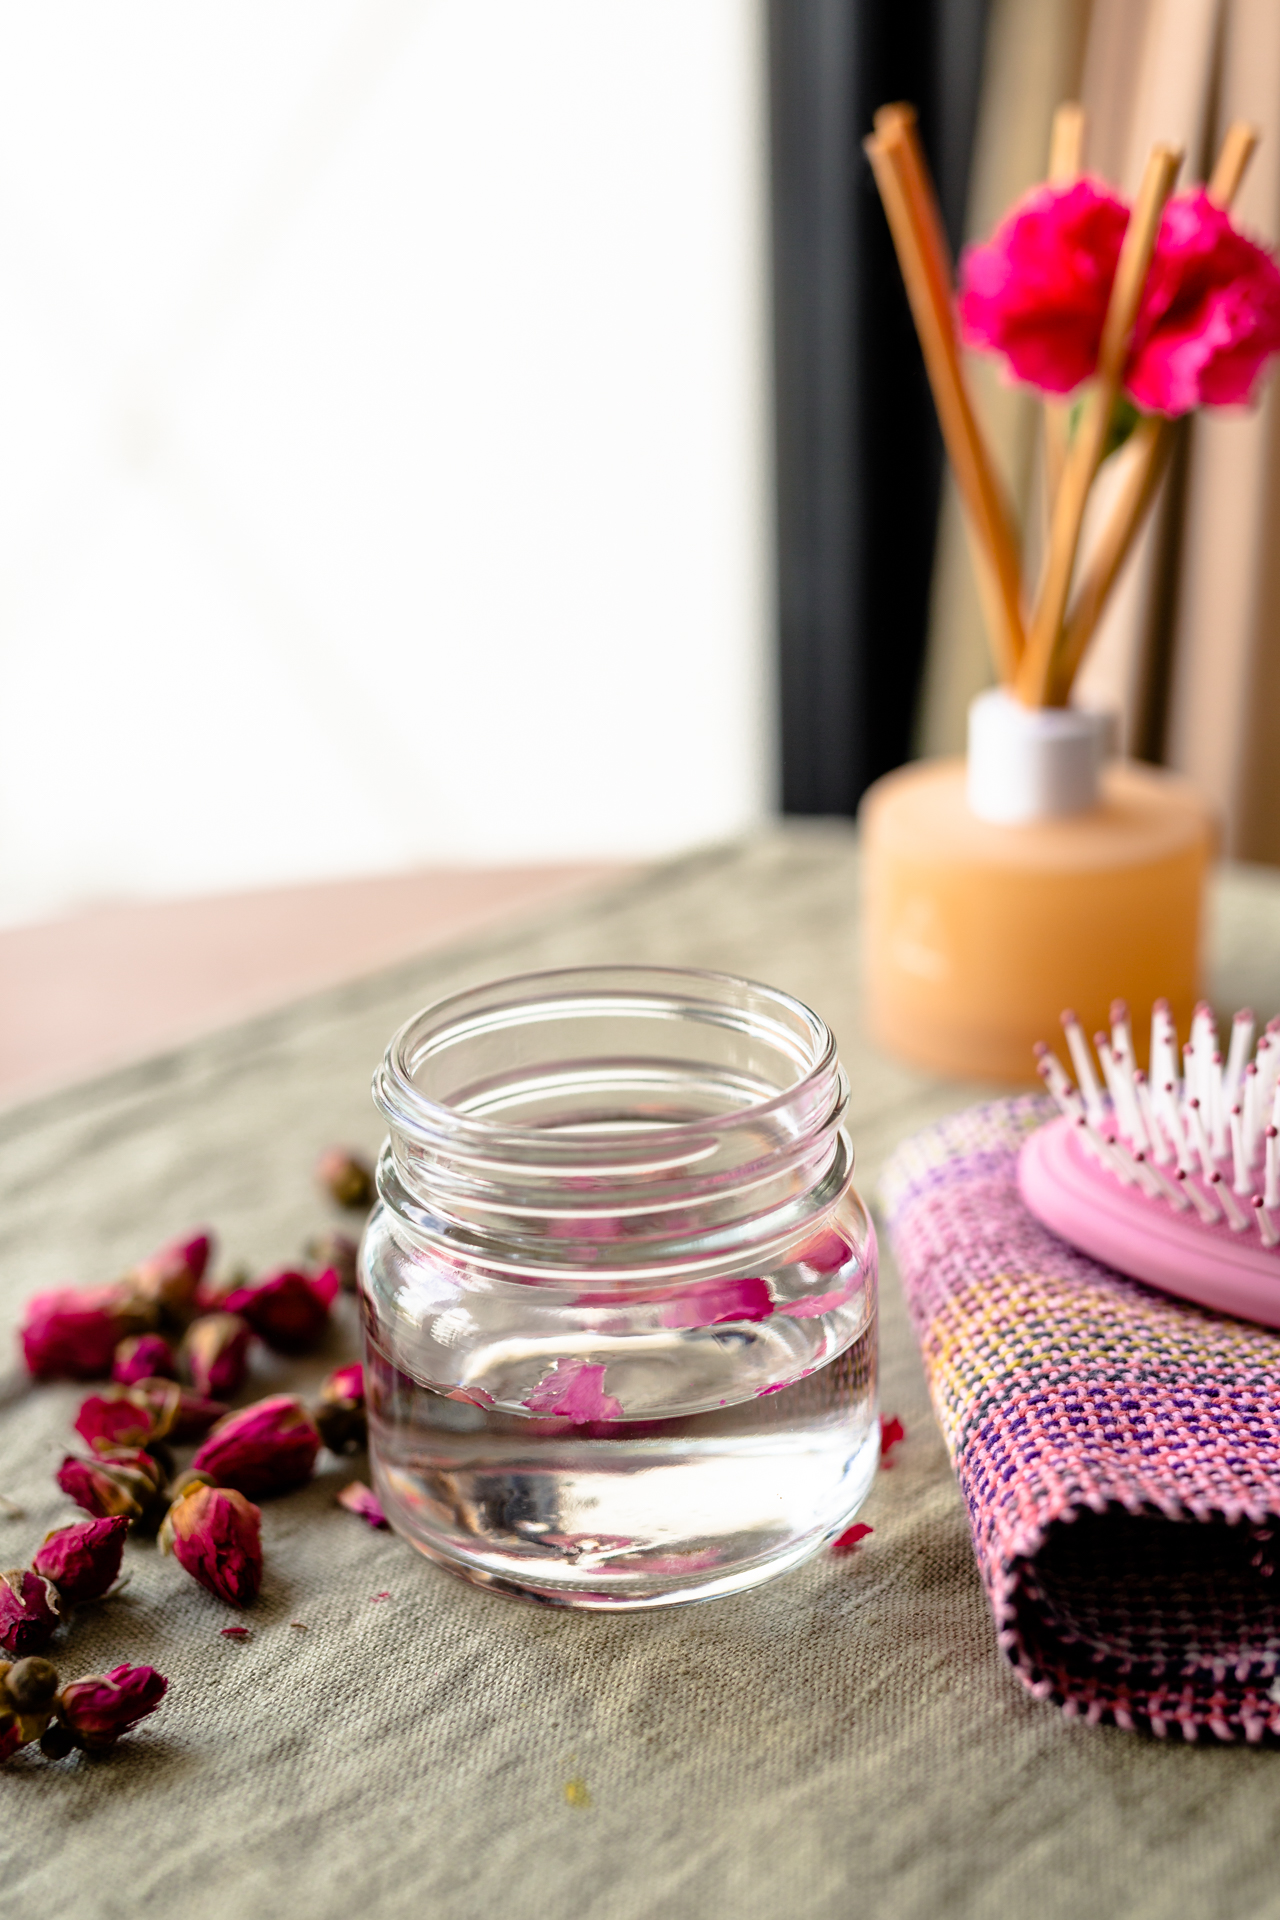 Benefits of Rosewater for Hair